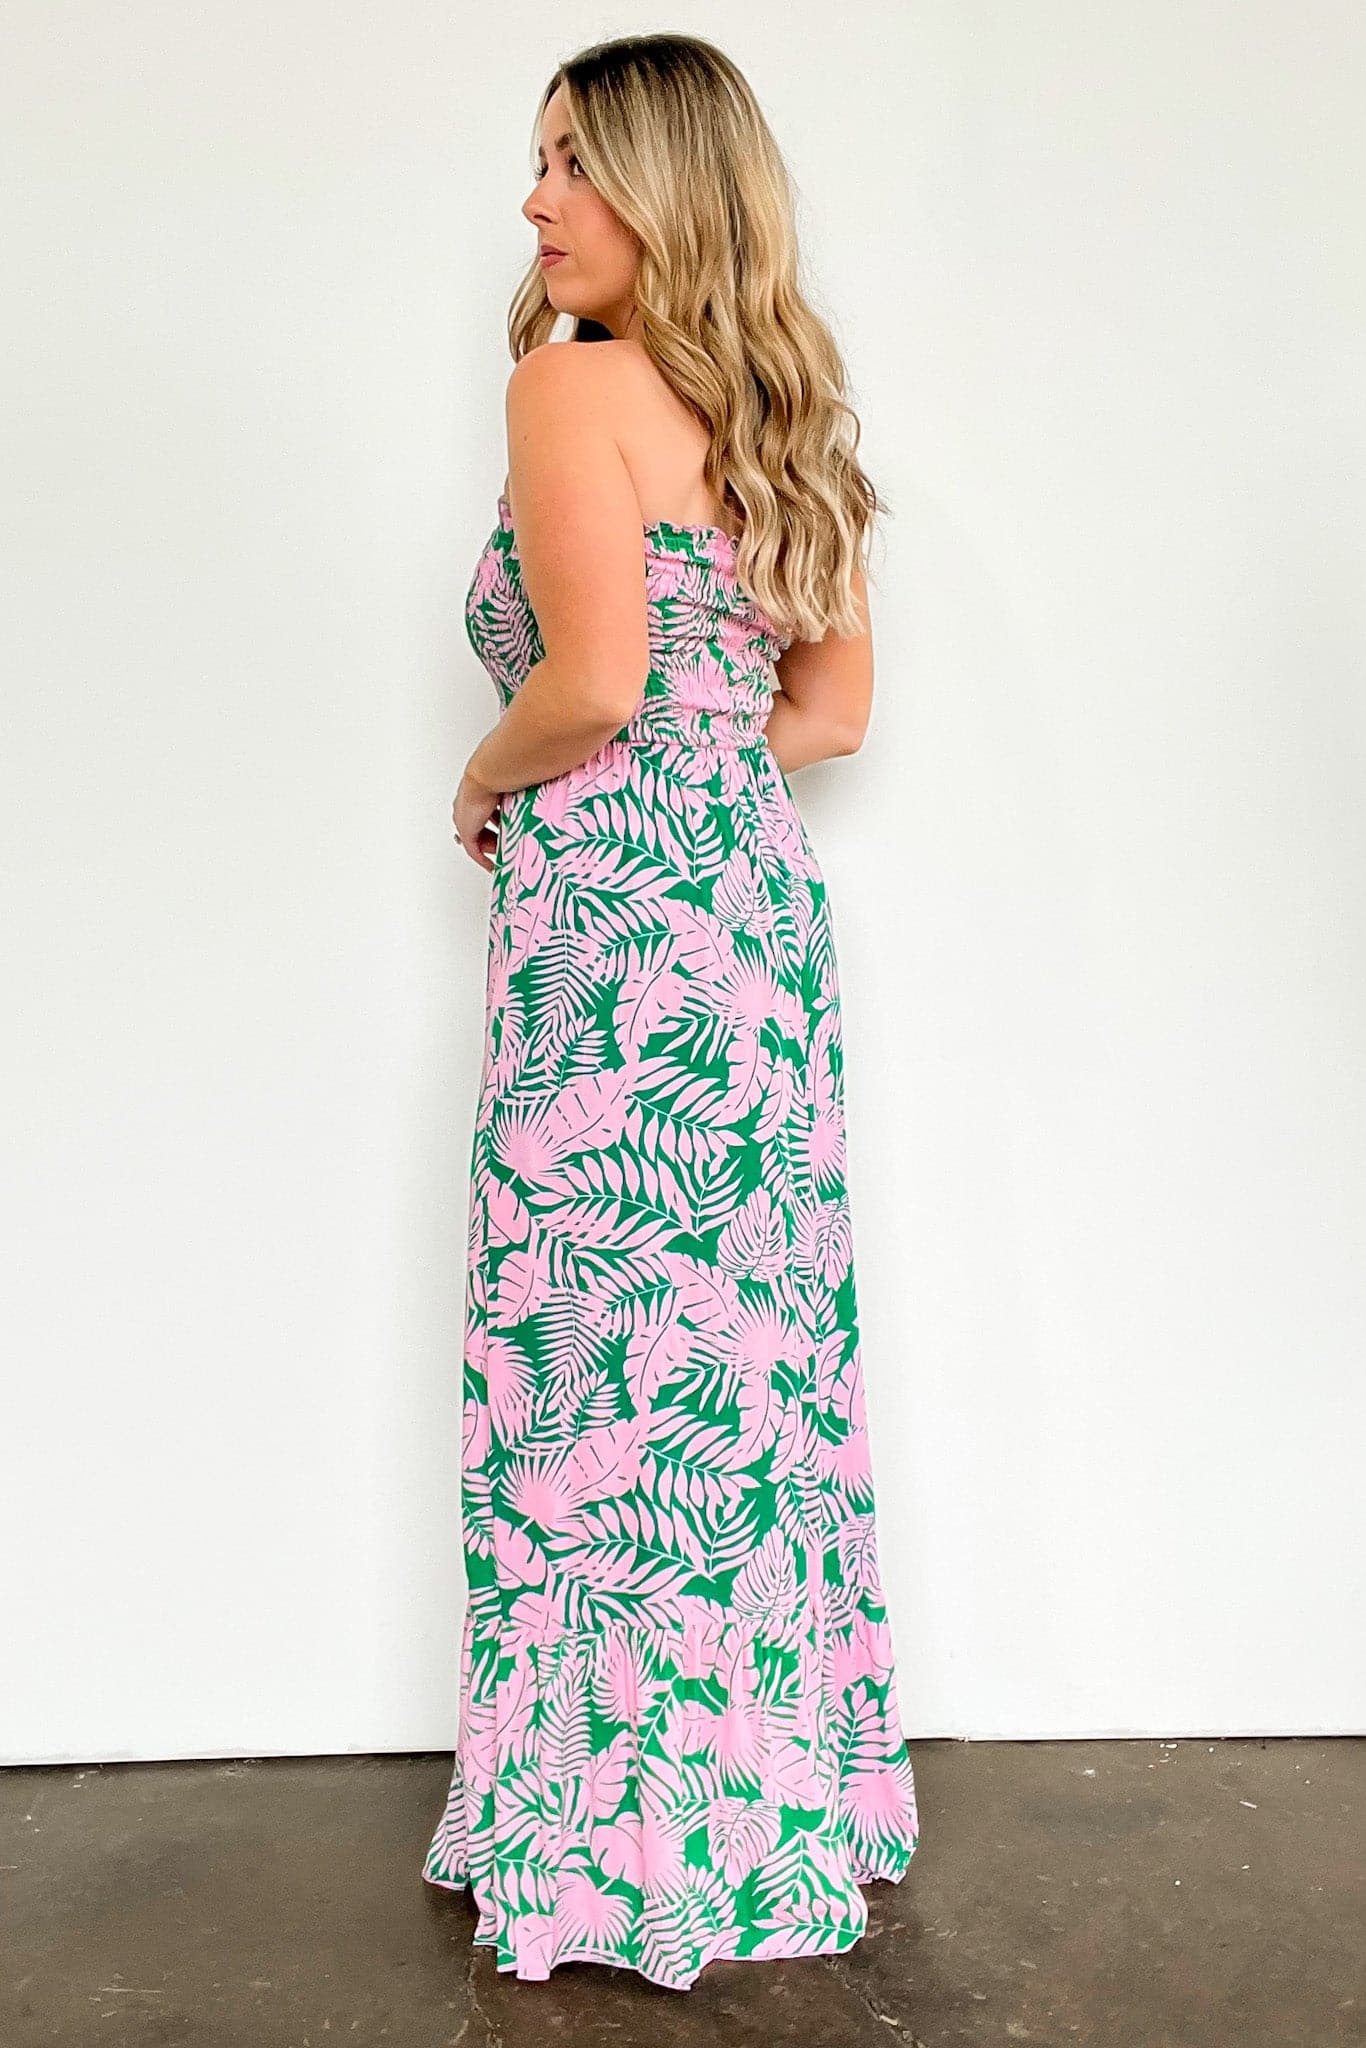  Still in Paradise Tropical Print Smocked Maxi Dress - FINAL SALE - Madison and Mallory